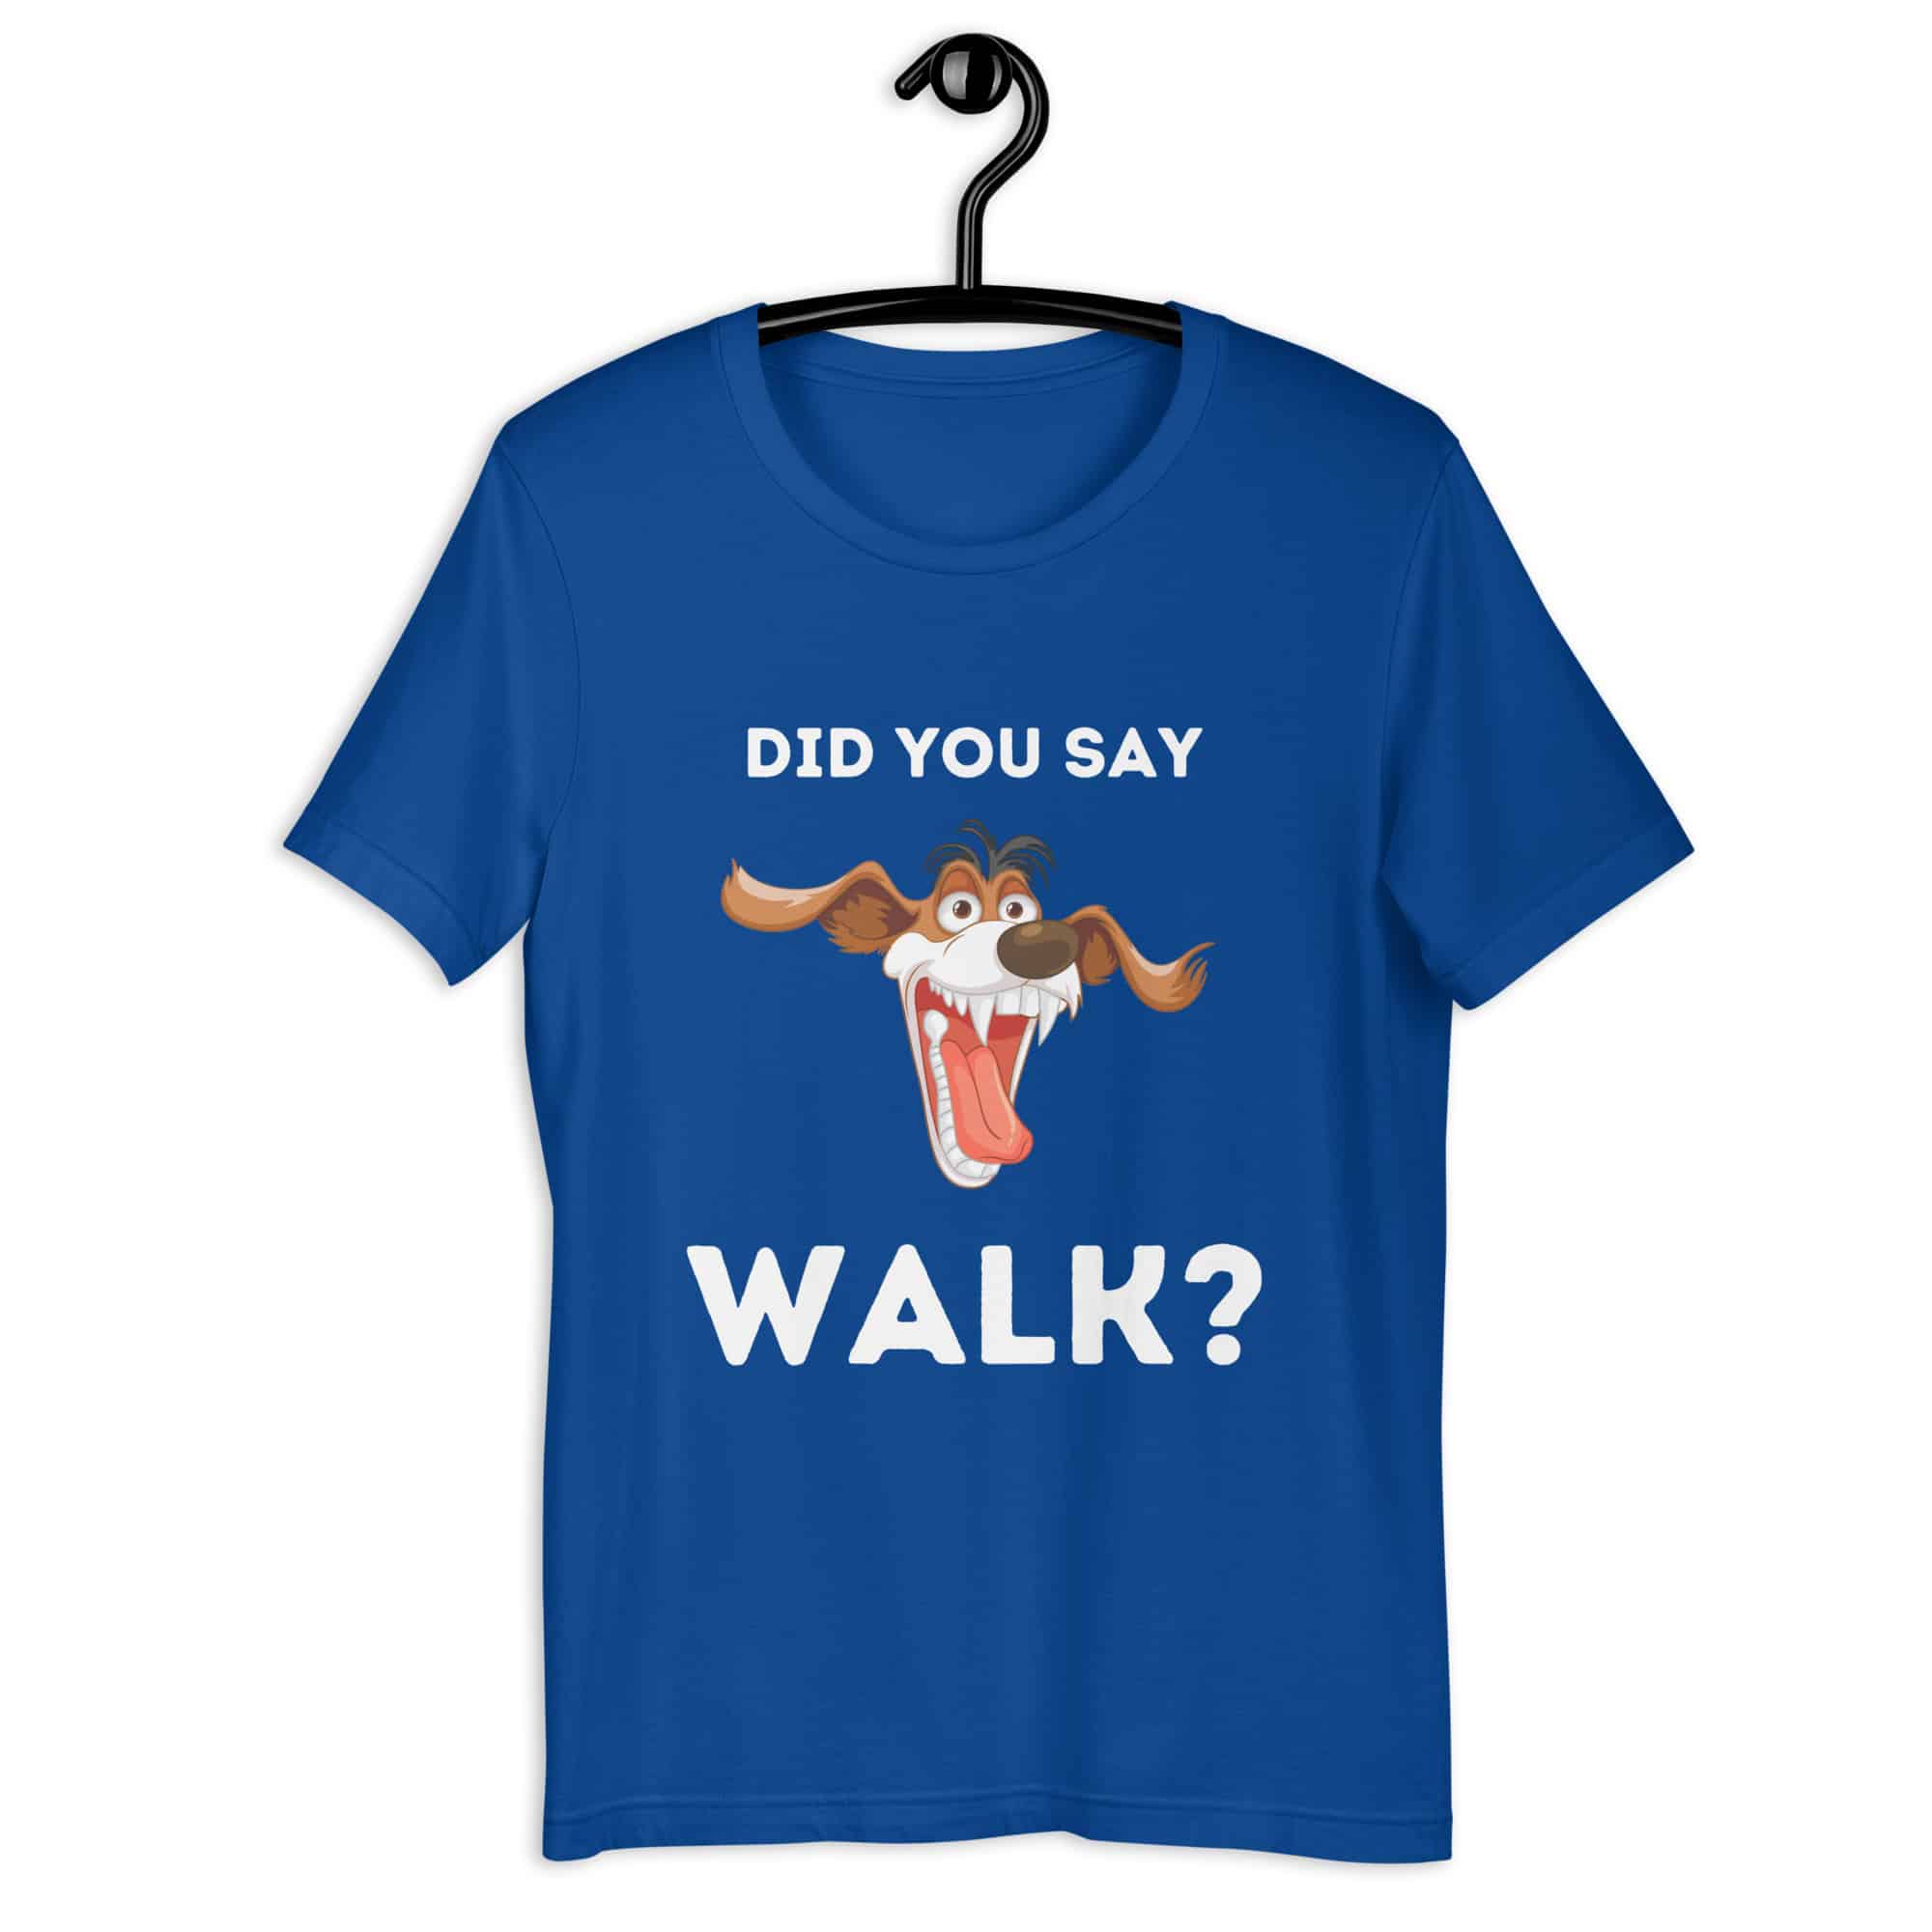 The "Funny 'Did You Say Walk?' Dog Unisex T-Shirt" captures the excitement dogs feel at the mention of a walk. Made from a comfortable, durable blend, it features a vibrant graphic that dog lovers will relate to. Available in various sizes and colors, it's perfect for casual wear, highlighting a universal moment in dog ownership with humor and style. Royal Blue